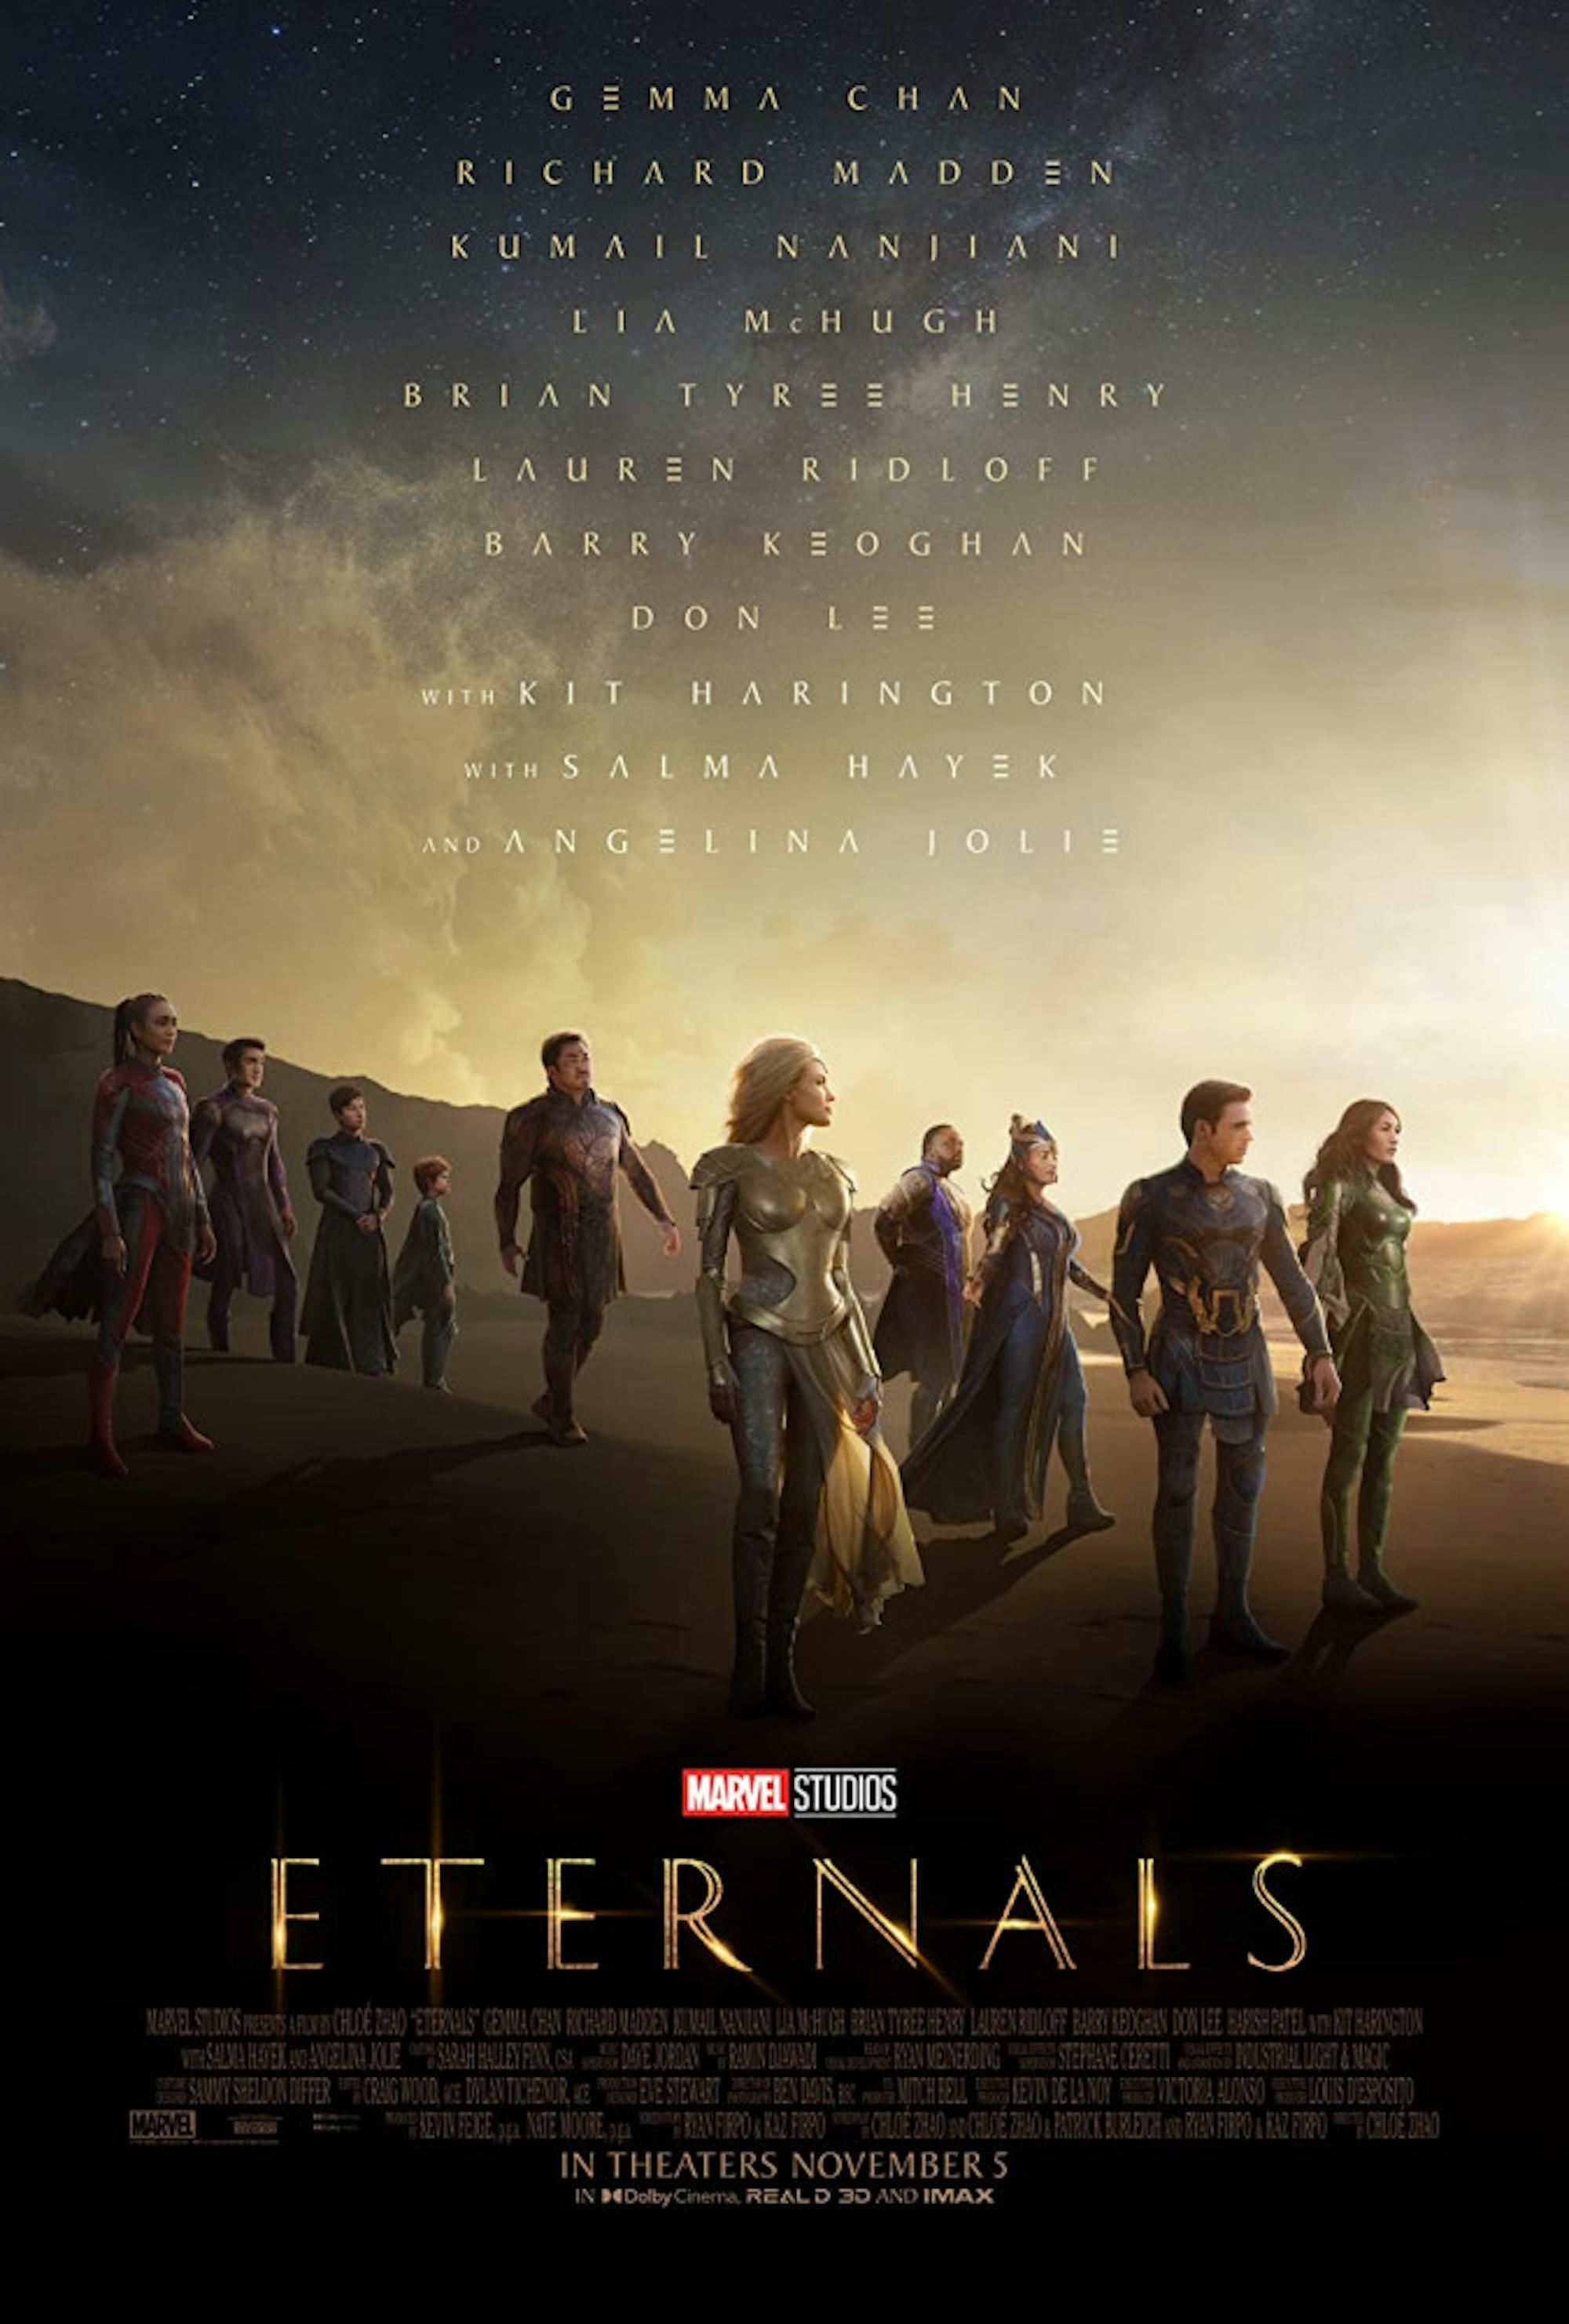 Who are the Eternals and why is it such a big deal that one of